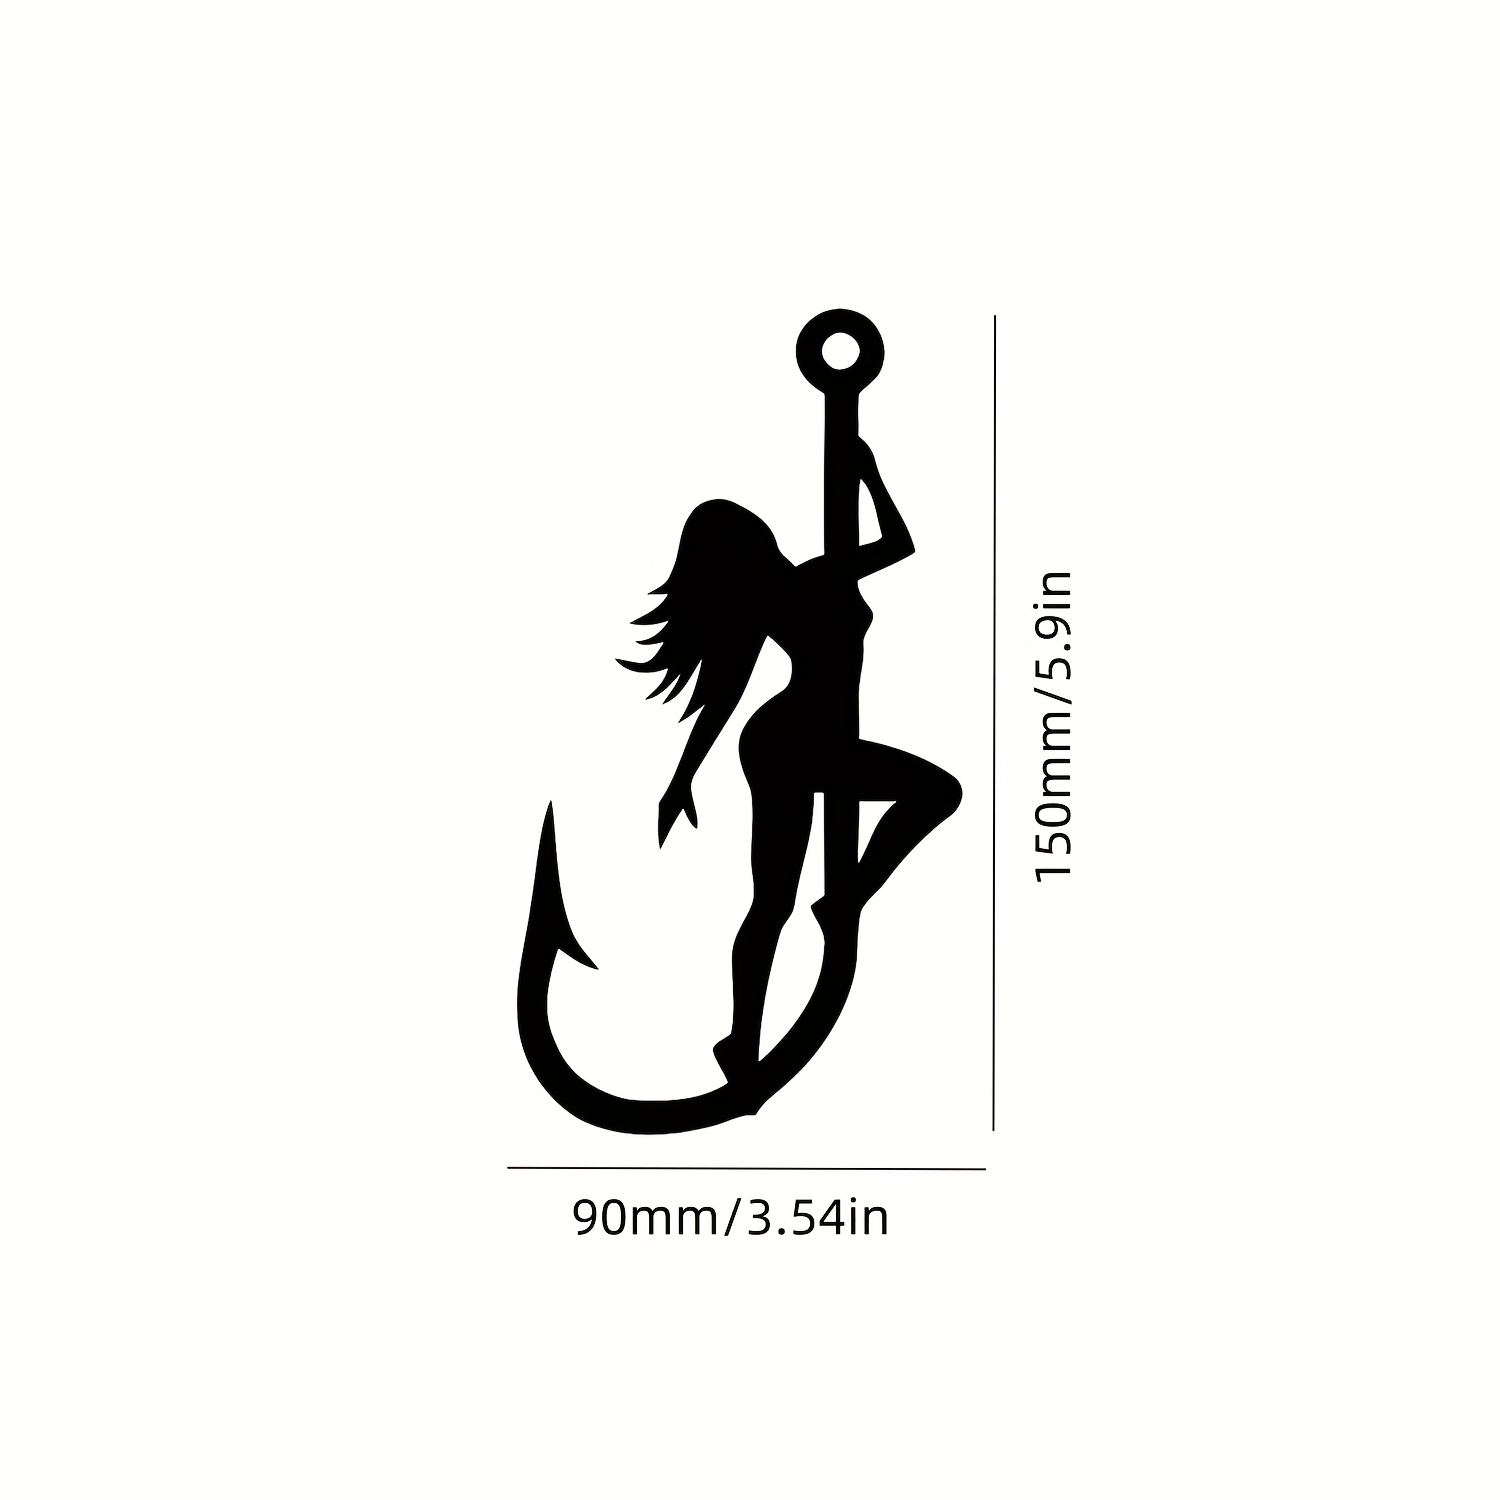 Buy Fish MYSTERY PACKS Vinyl Decal Sticker, Outdoor Girl, Fishing Girl, Girl  Decals, Car , Tackle Box Sticker, Reel Girls Fish Online in India 